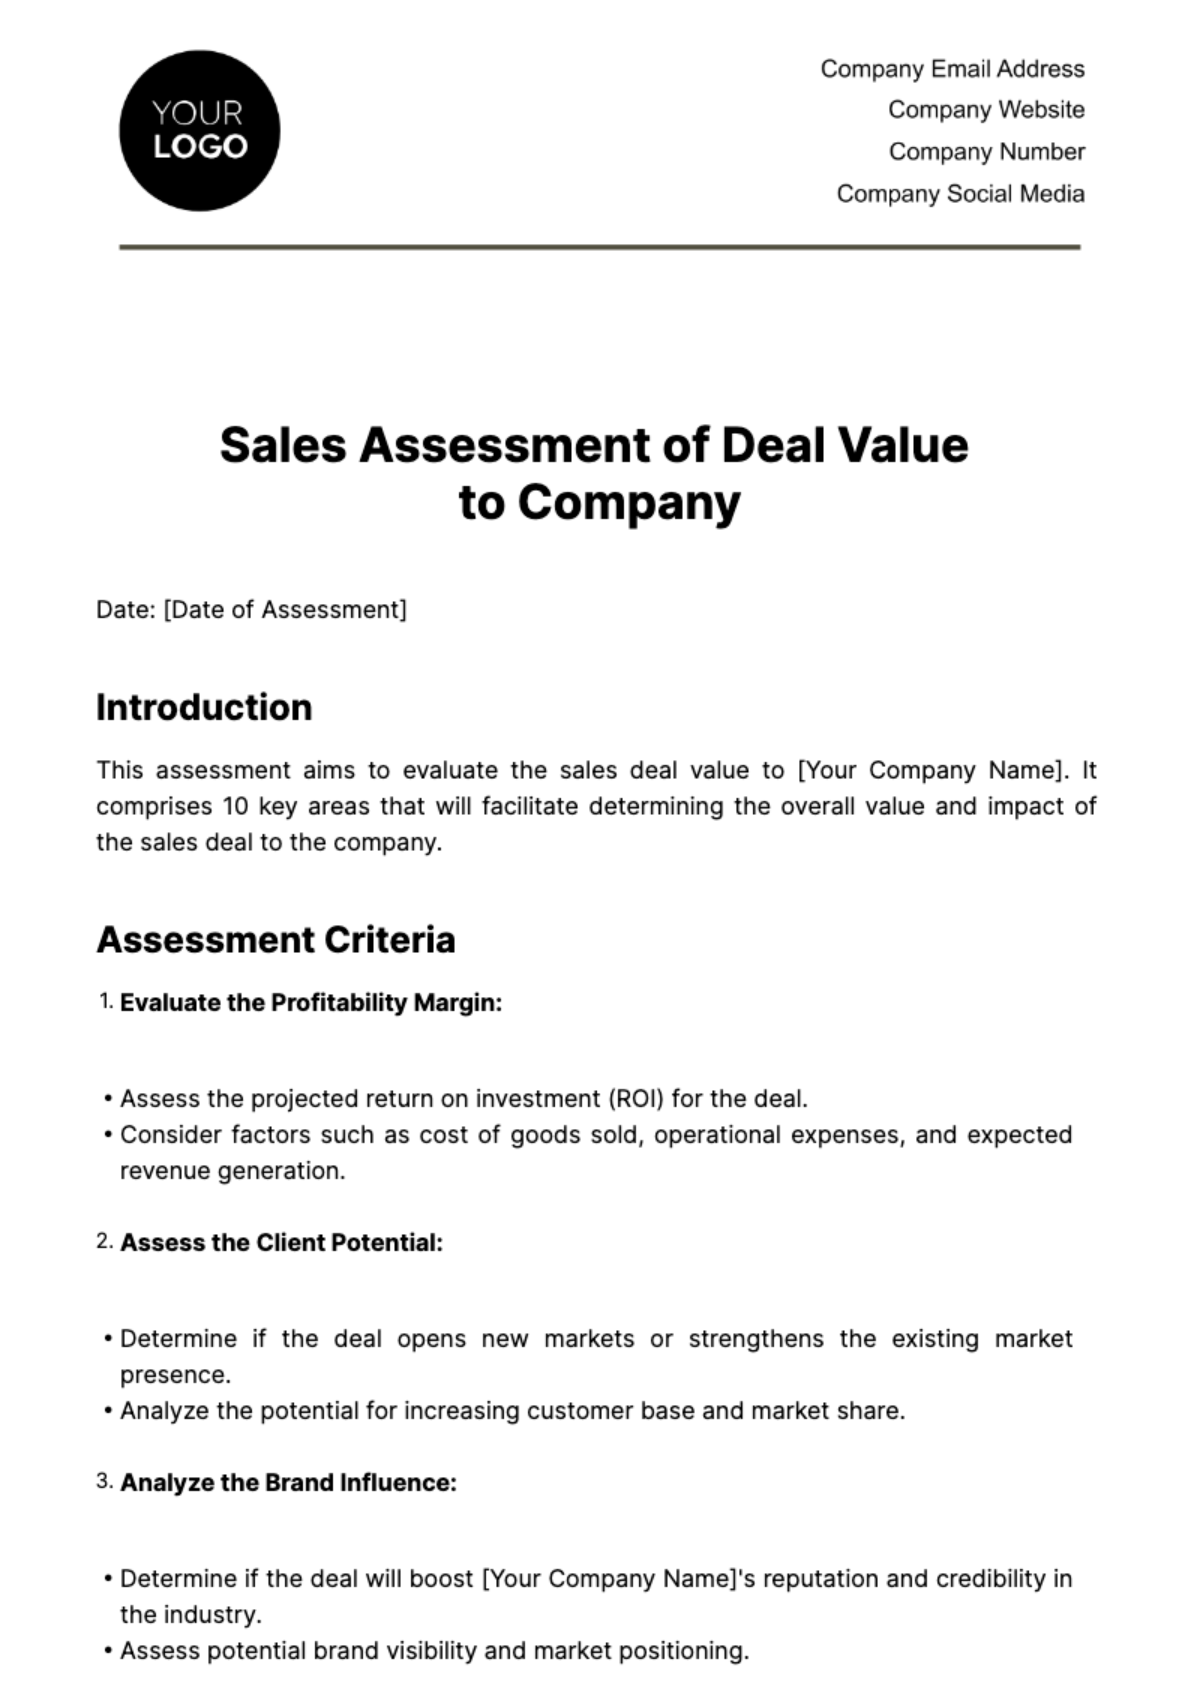 Free Sales Assessment of Deal Value to Company Template